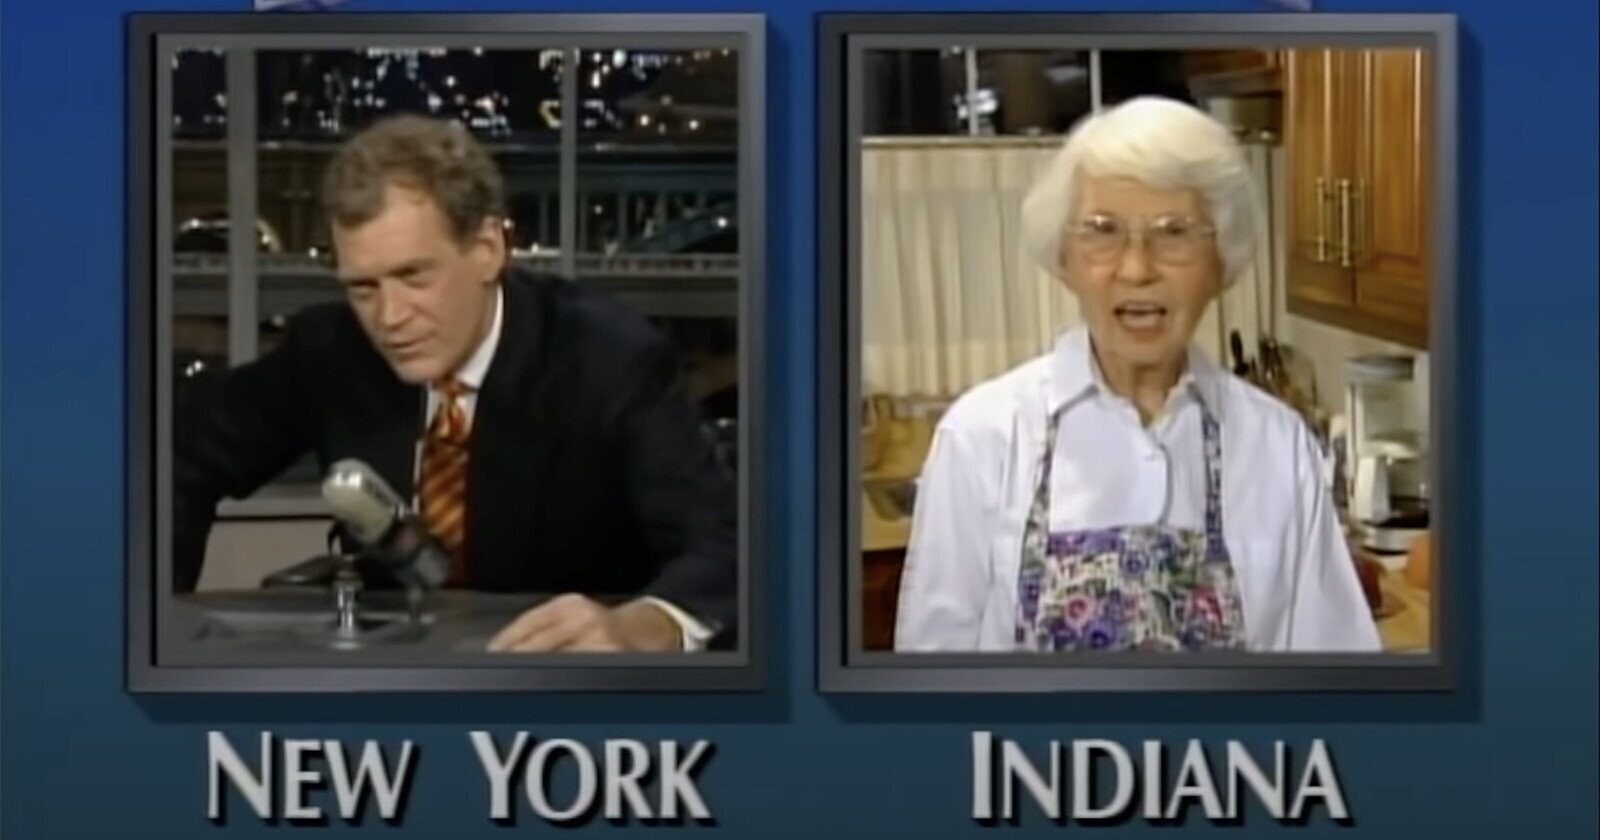 The Funniest David Letterman Jokes and Moments for the Comedy Hall of Fame